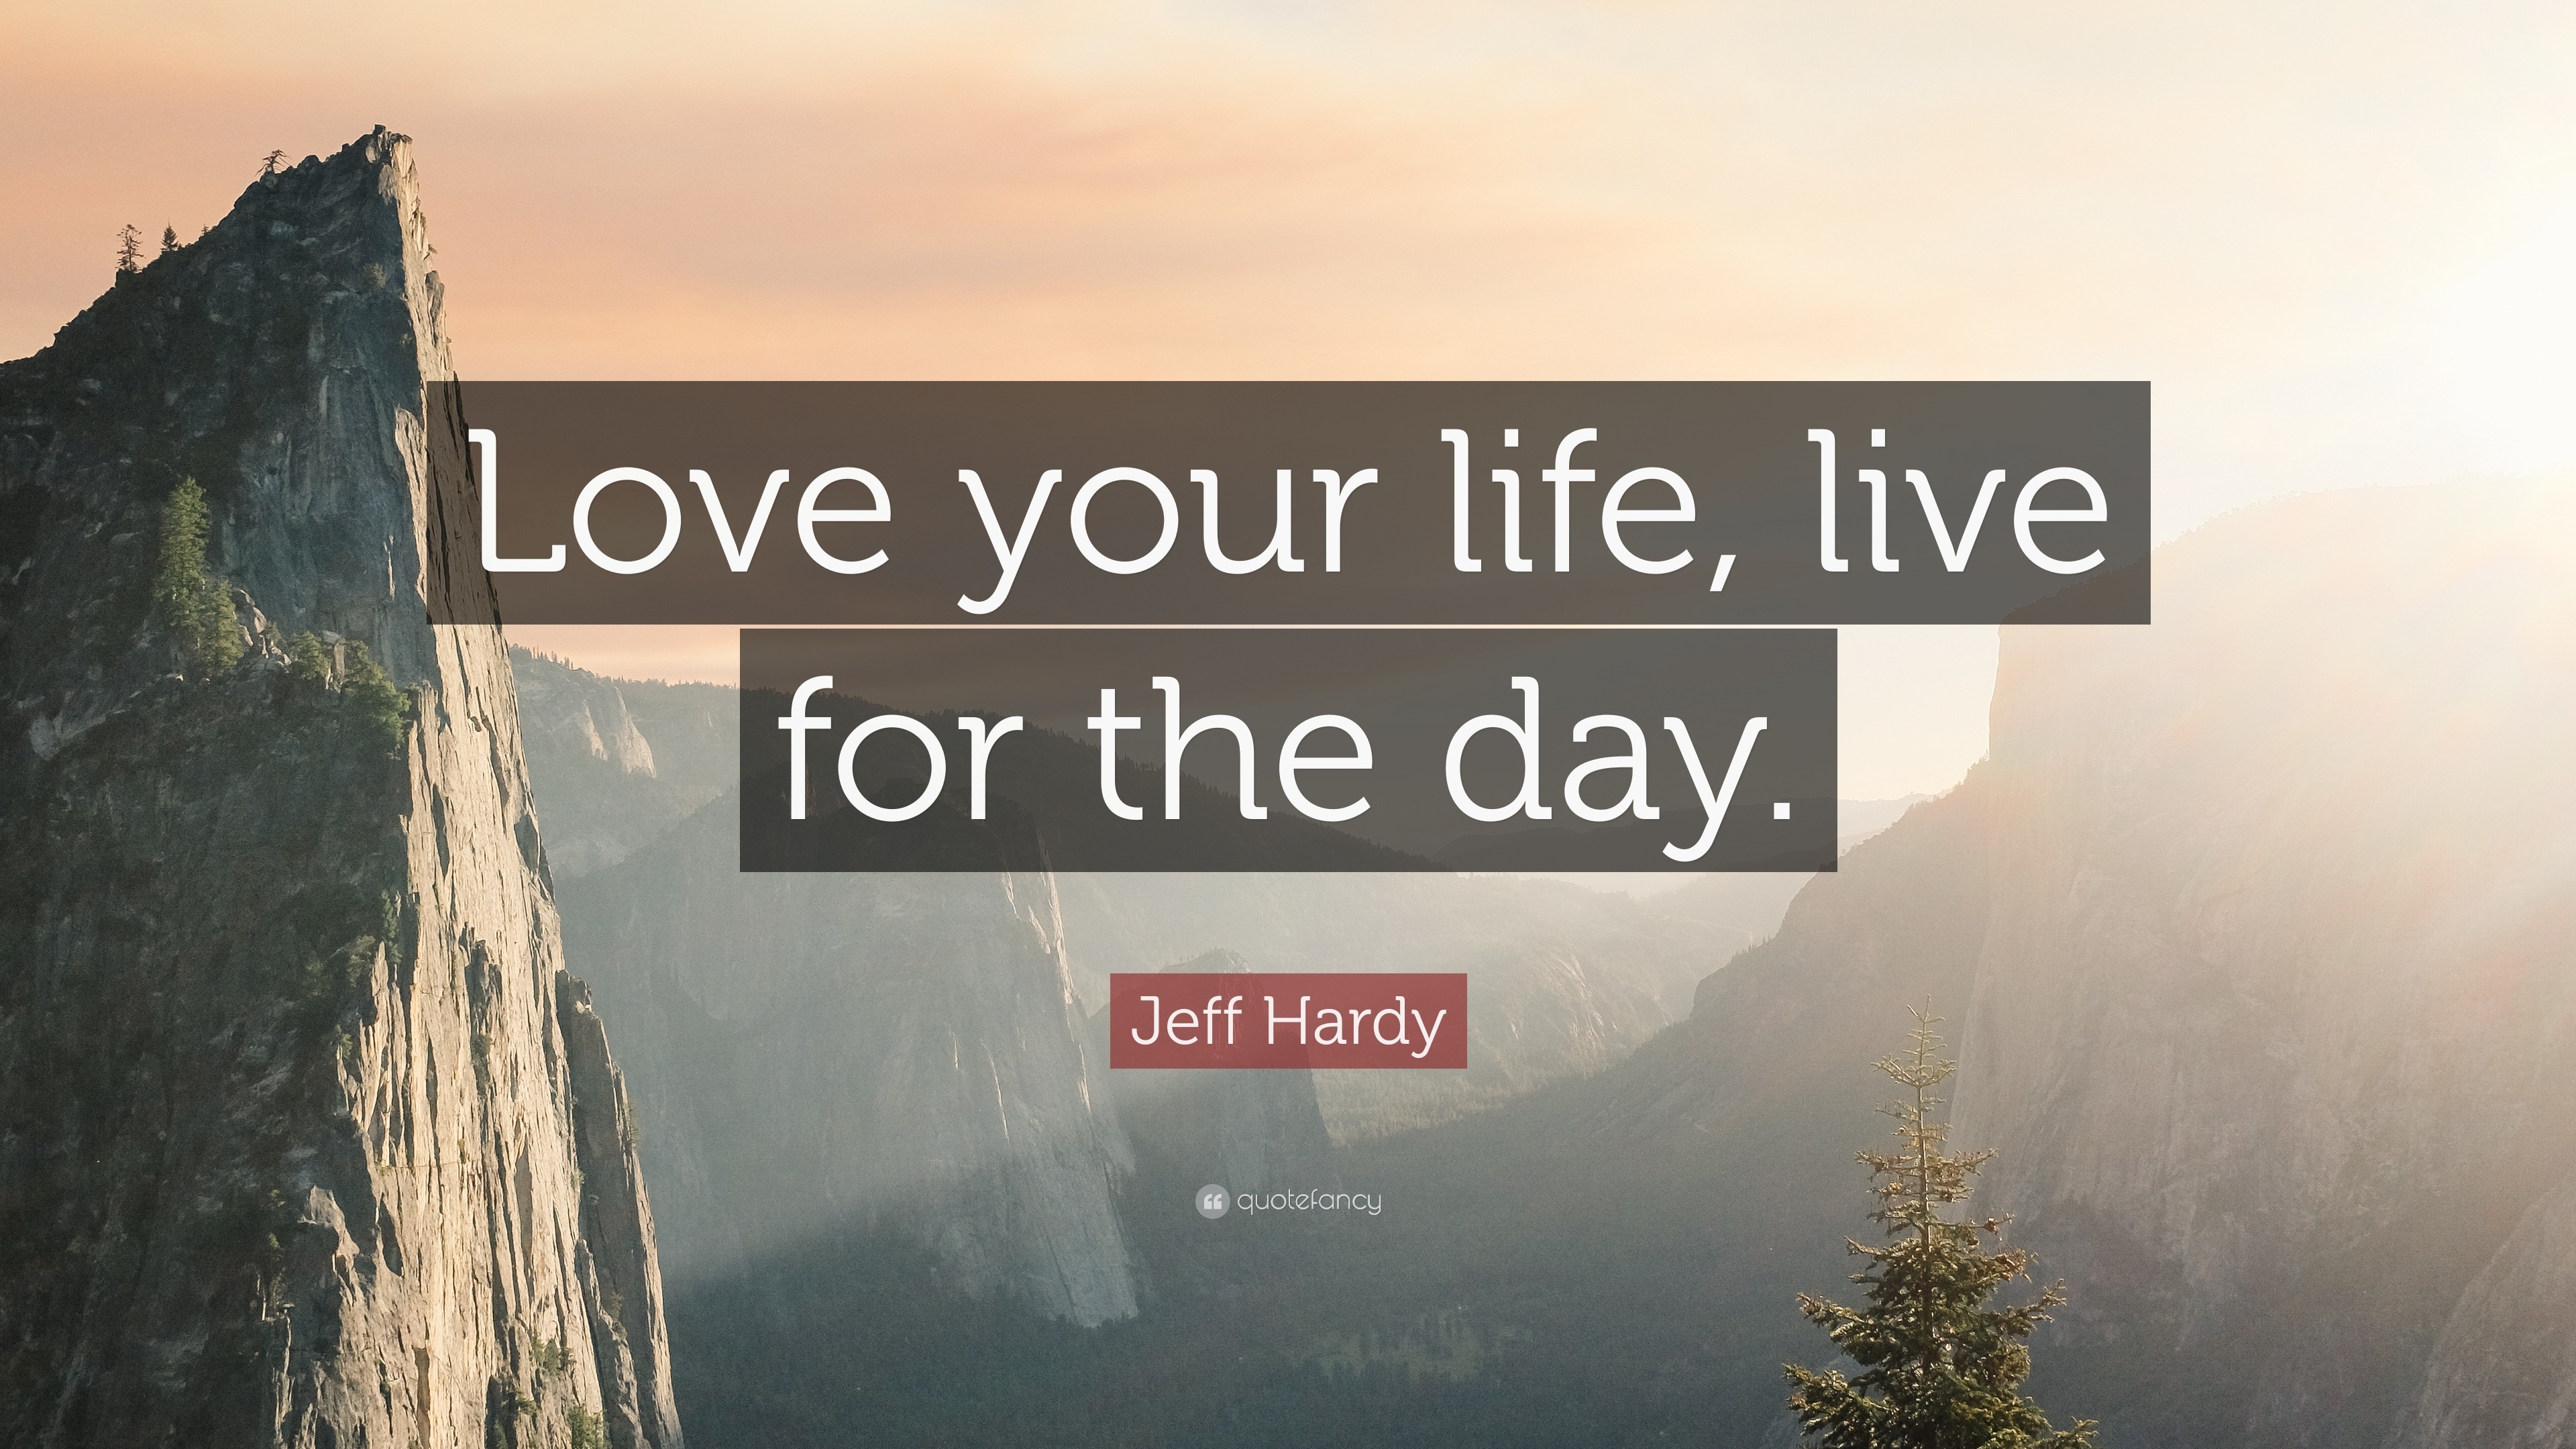 Jeff Hardy Quote “Love your life live for the day ”